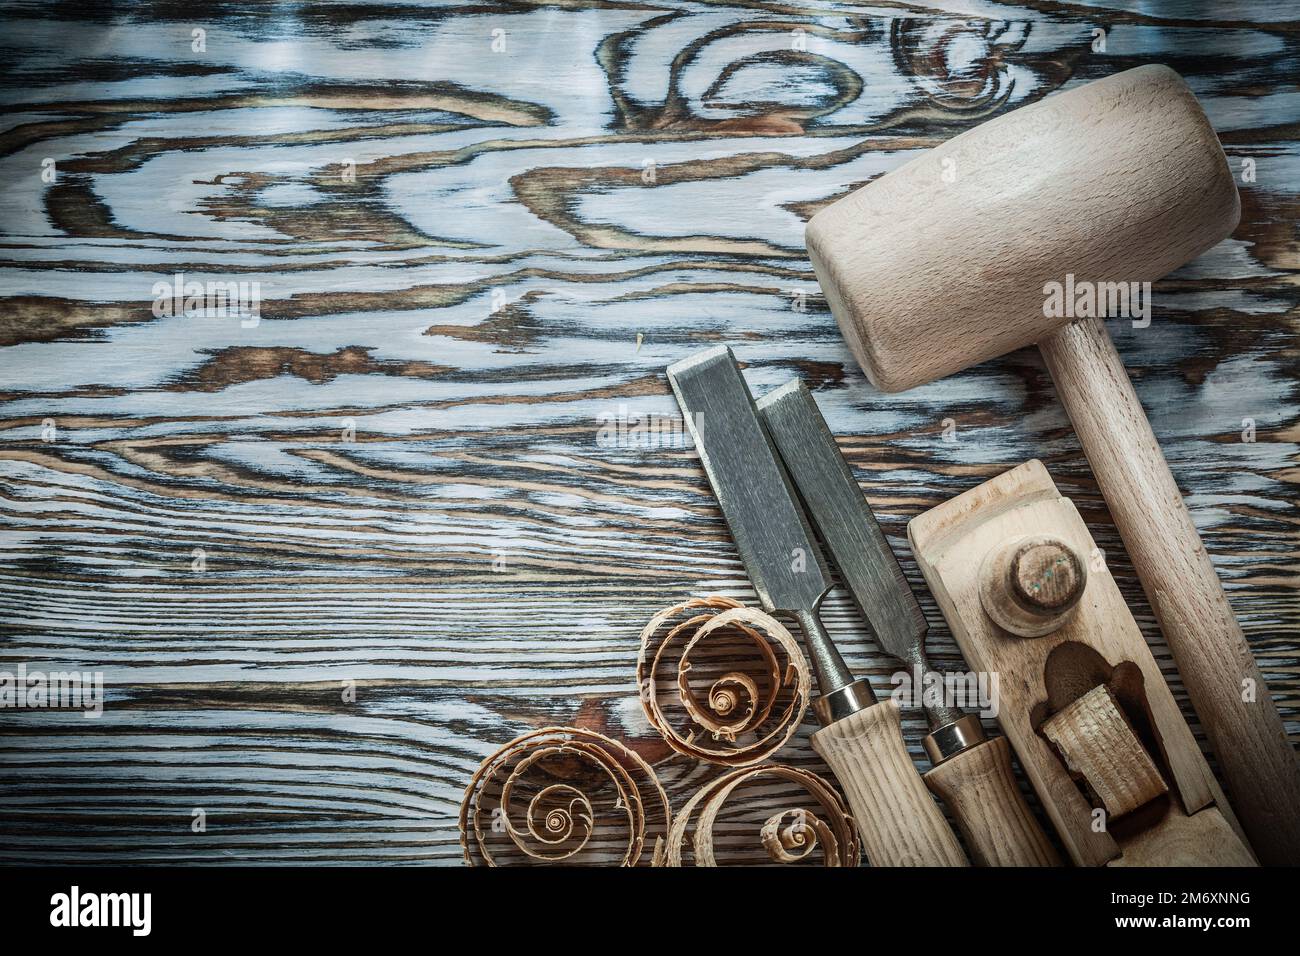 Lump hammer chisels planer curled shavings on wood board. Stock Photo